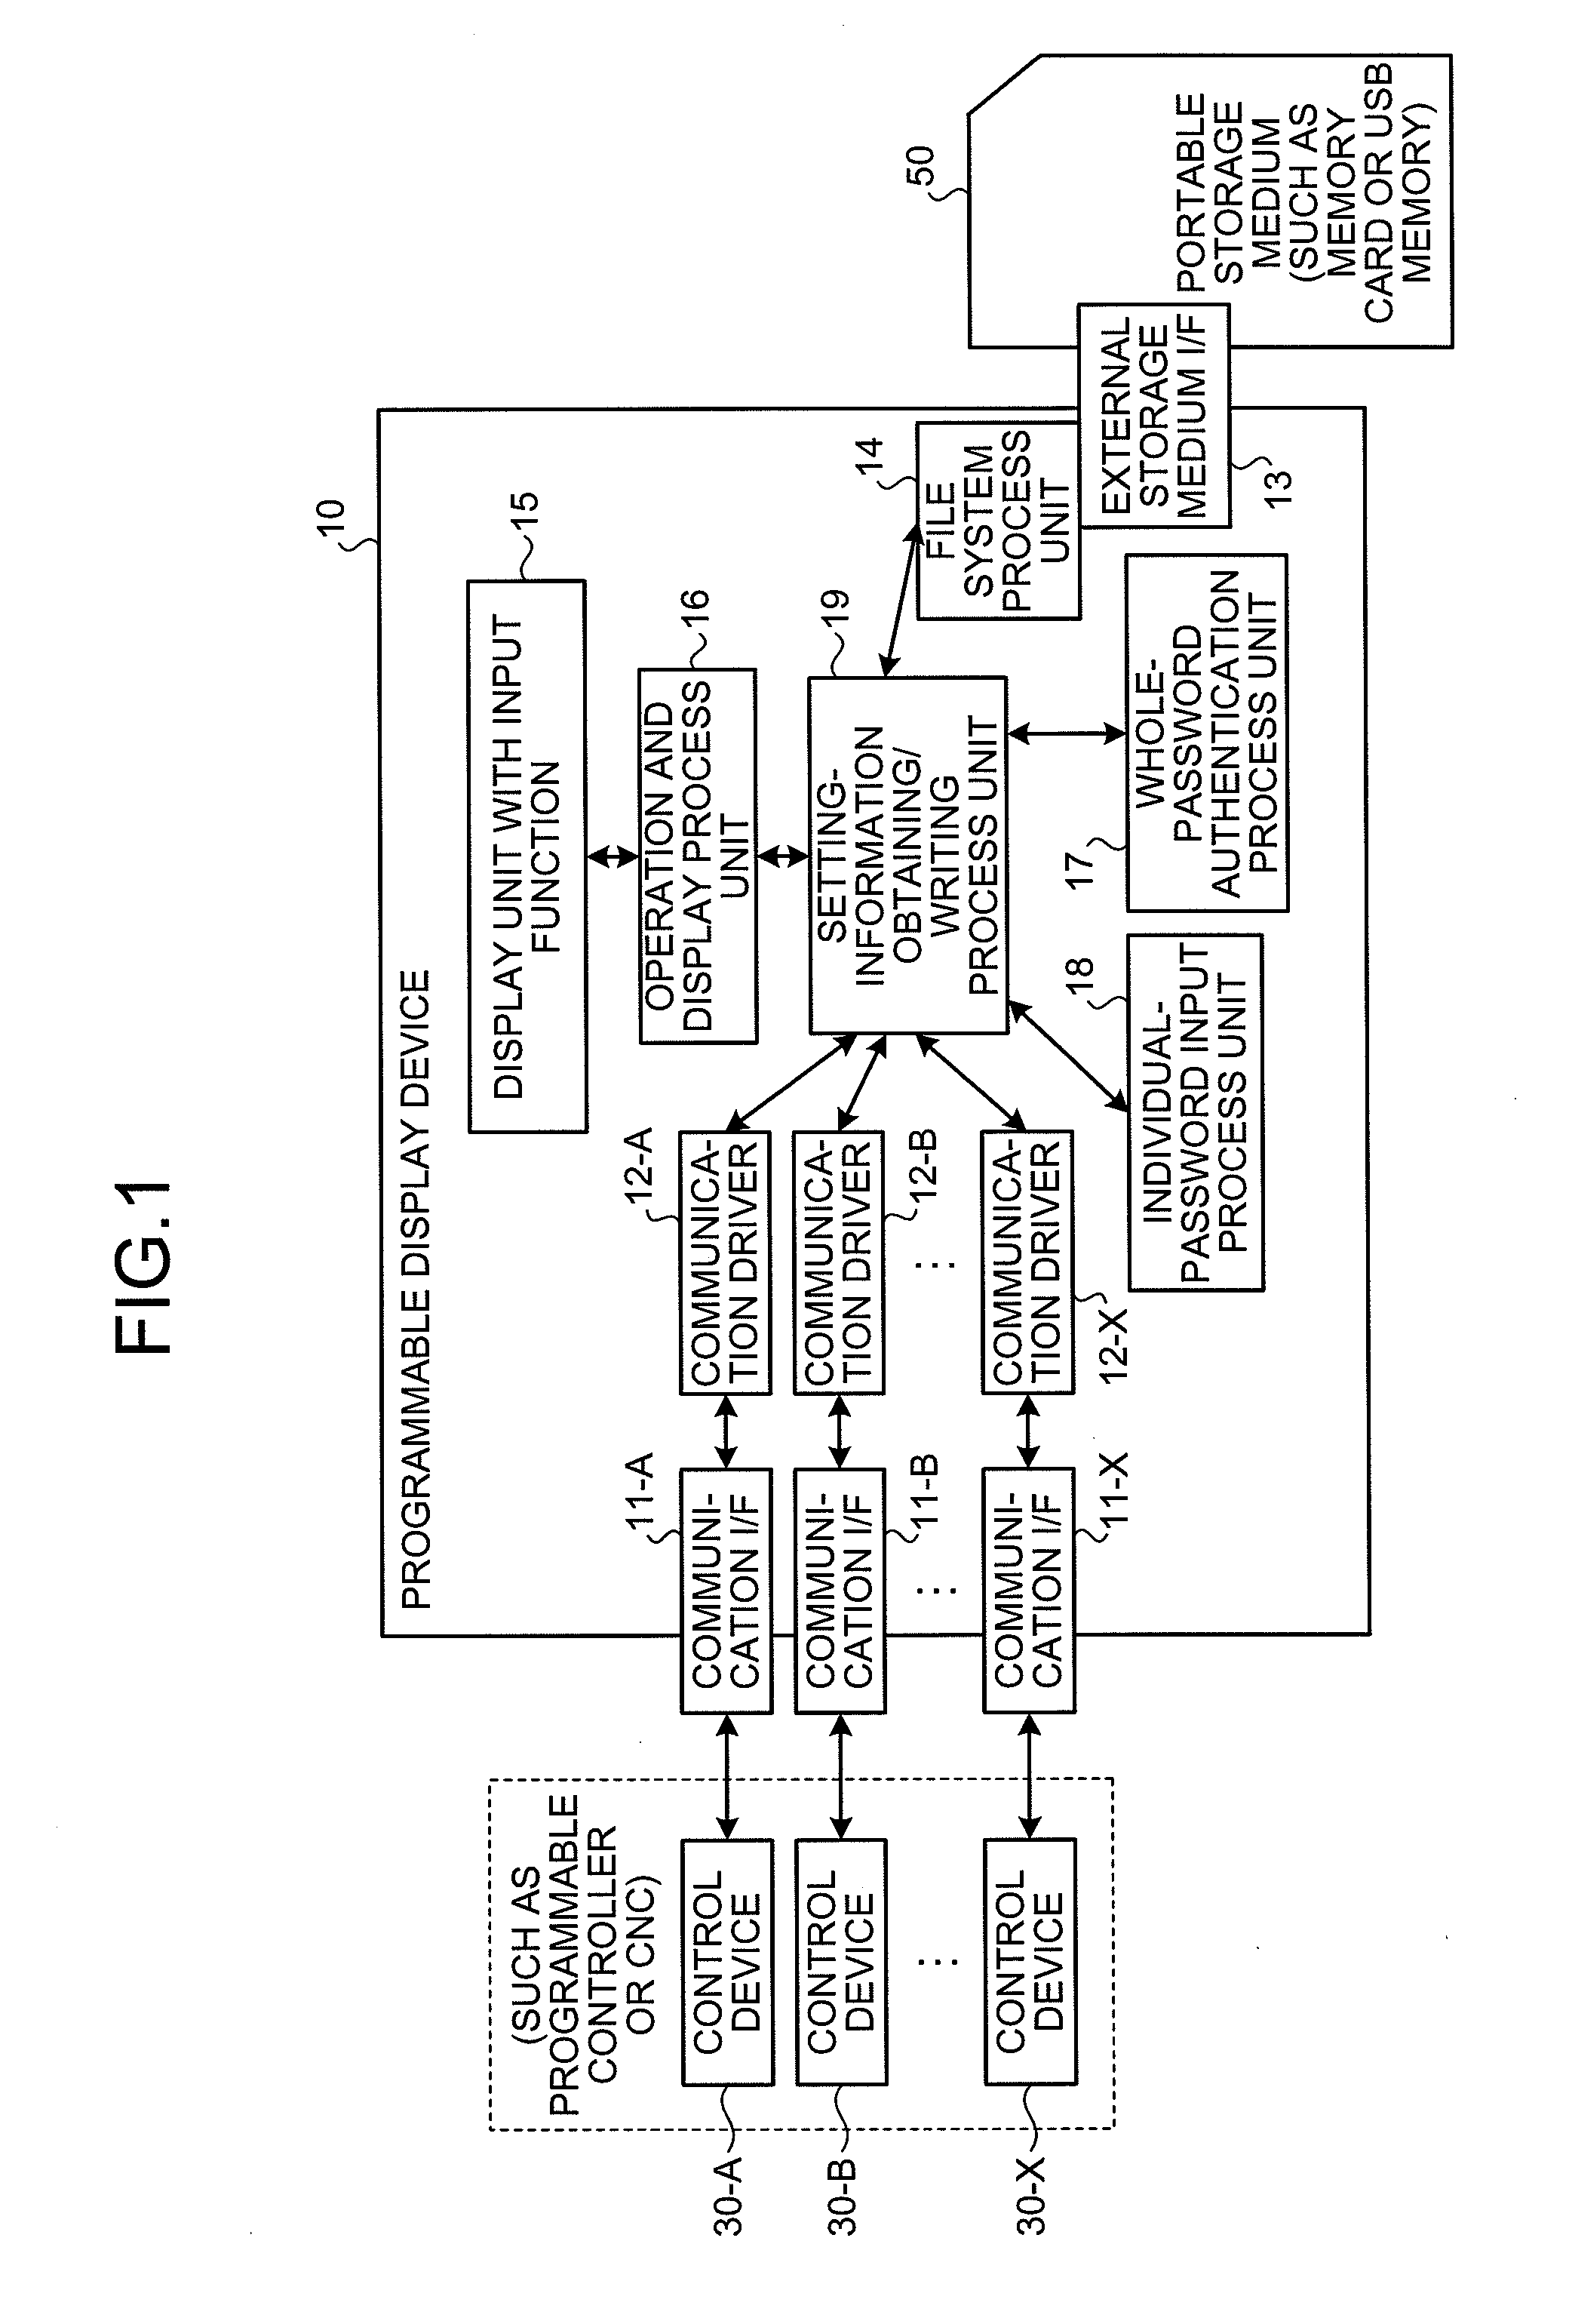 Programmable display device, and control system